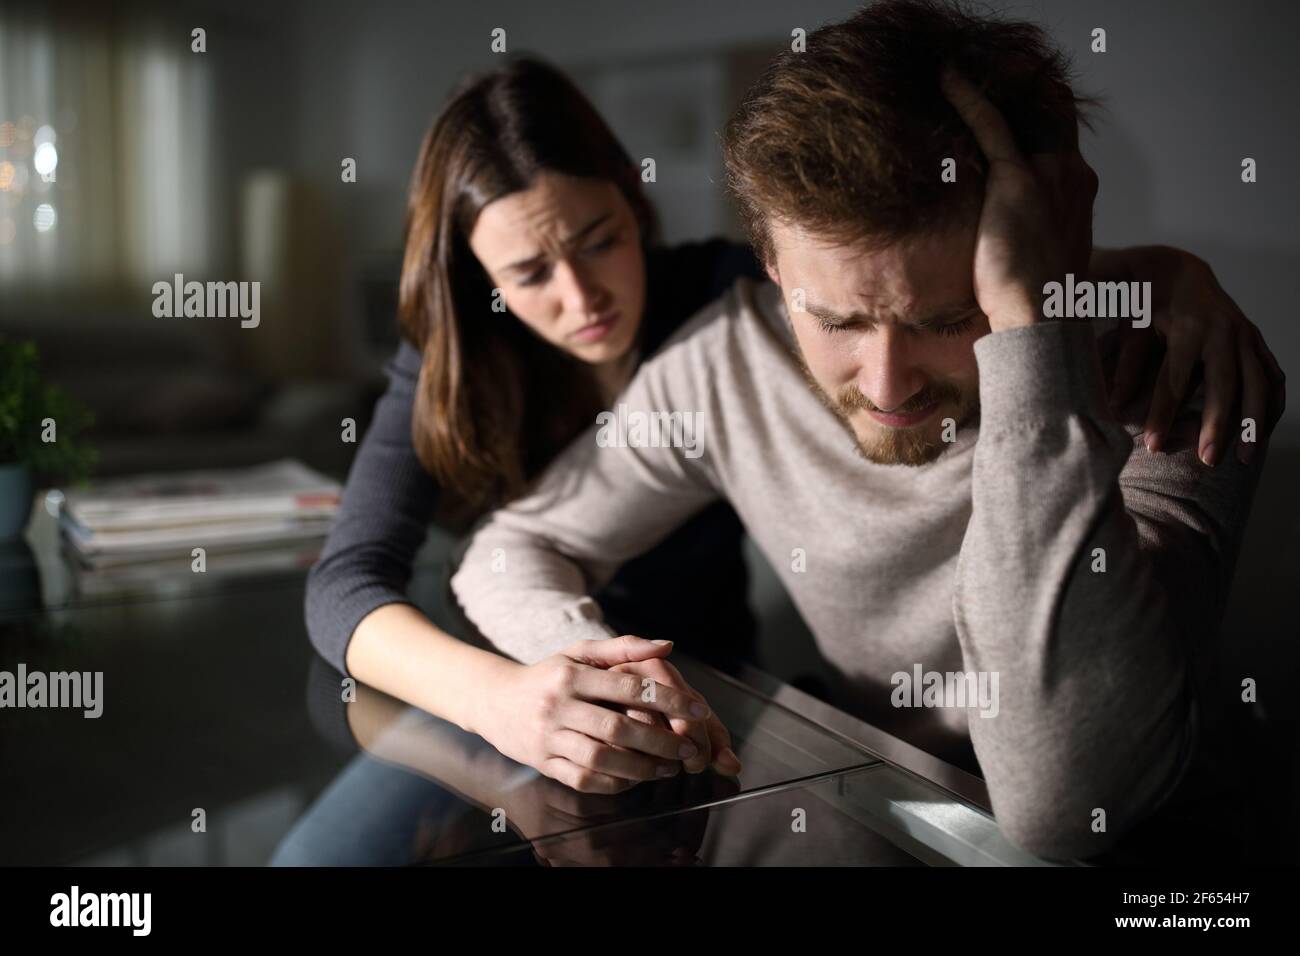 Sad man being comforted by his wife in the night at home Stock Photo